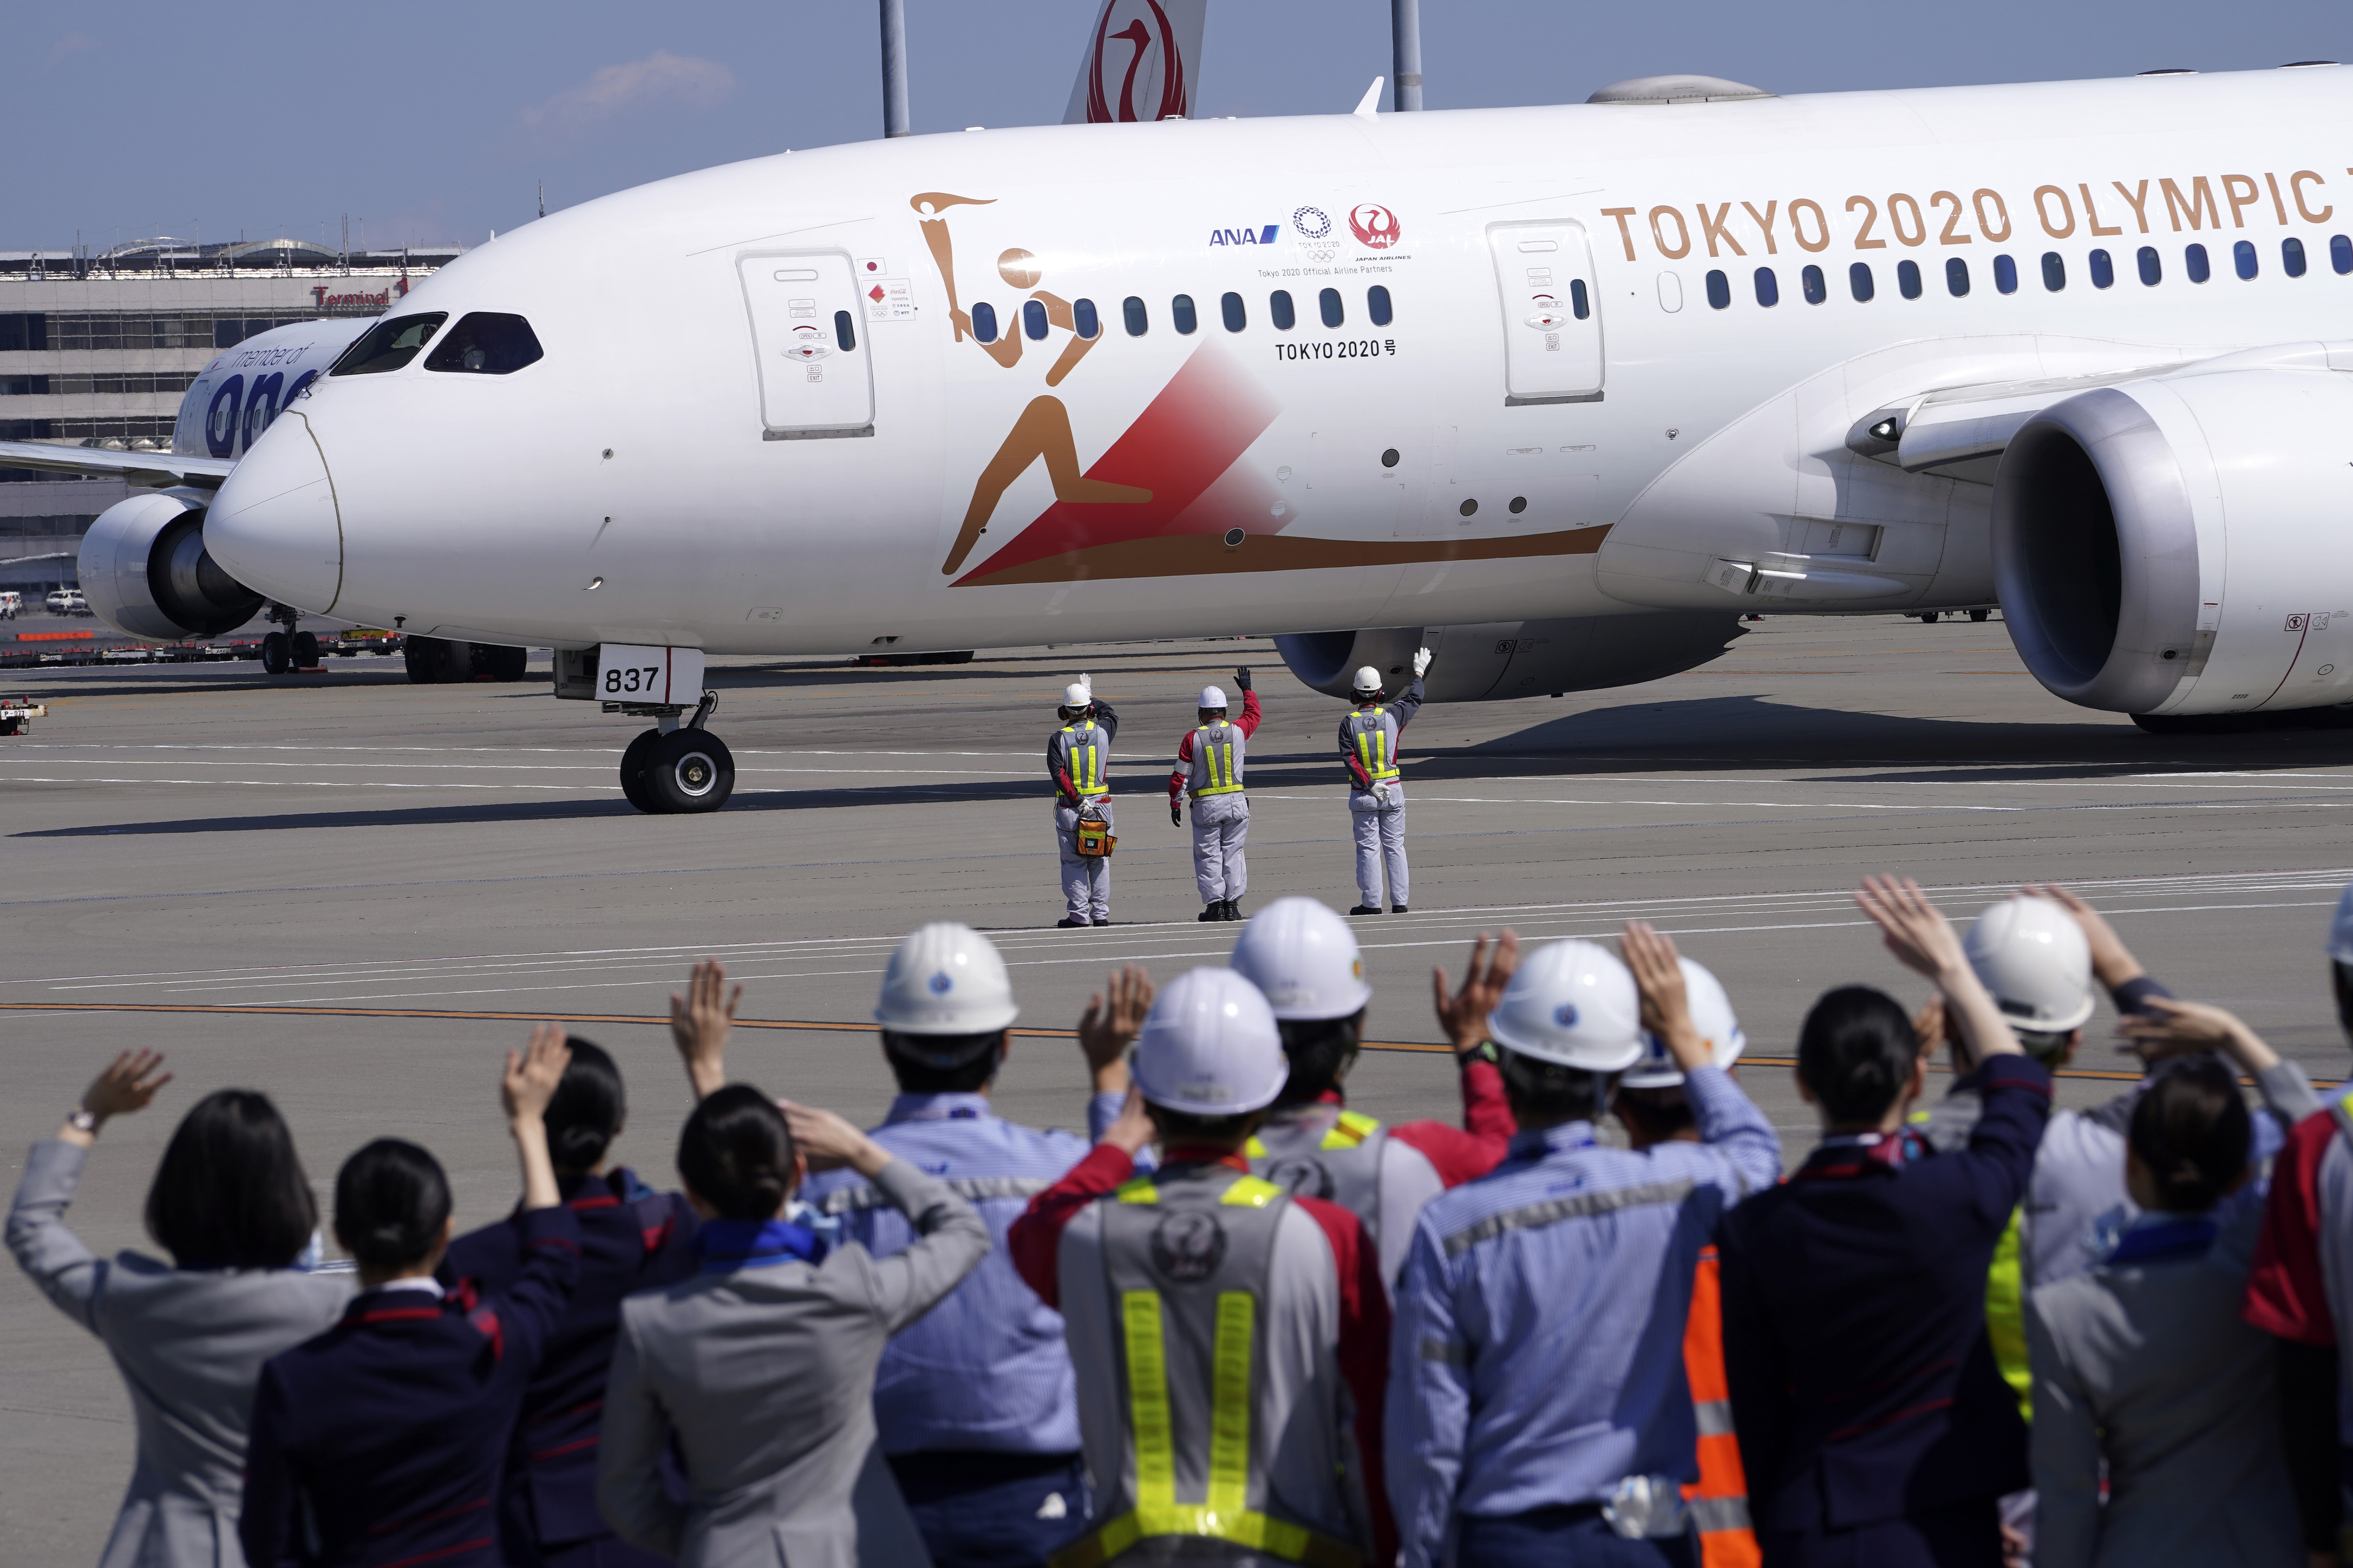 Ground crews of Japanese airlines wave to the special "Tokyo 2020 Go" aircraft that will transport the Olympic Flame to Japan from Greece, on its departure at Haneda International Airport in Tokyo Wednesday, March 18, 2020. (AP Photo/Eugene Hoshiko)